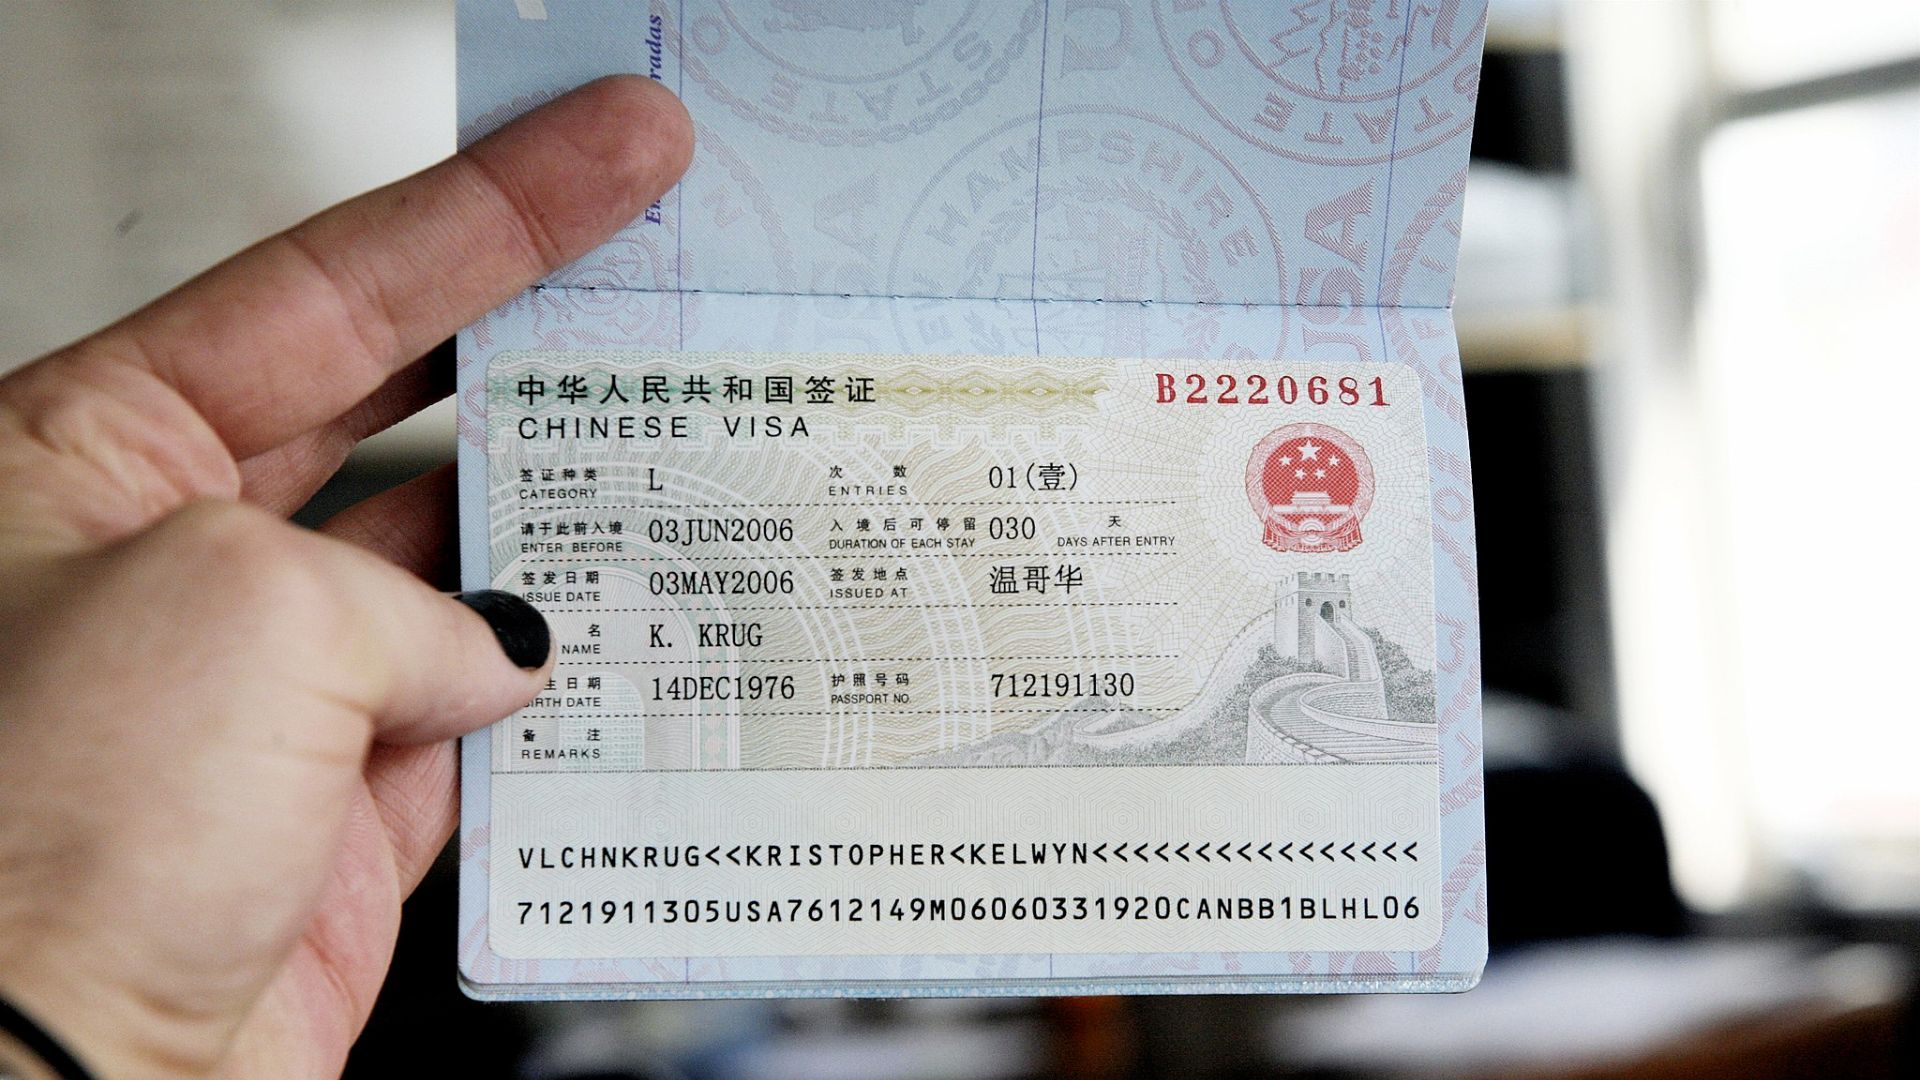 how to get travel visa to china